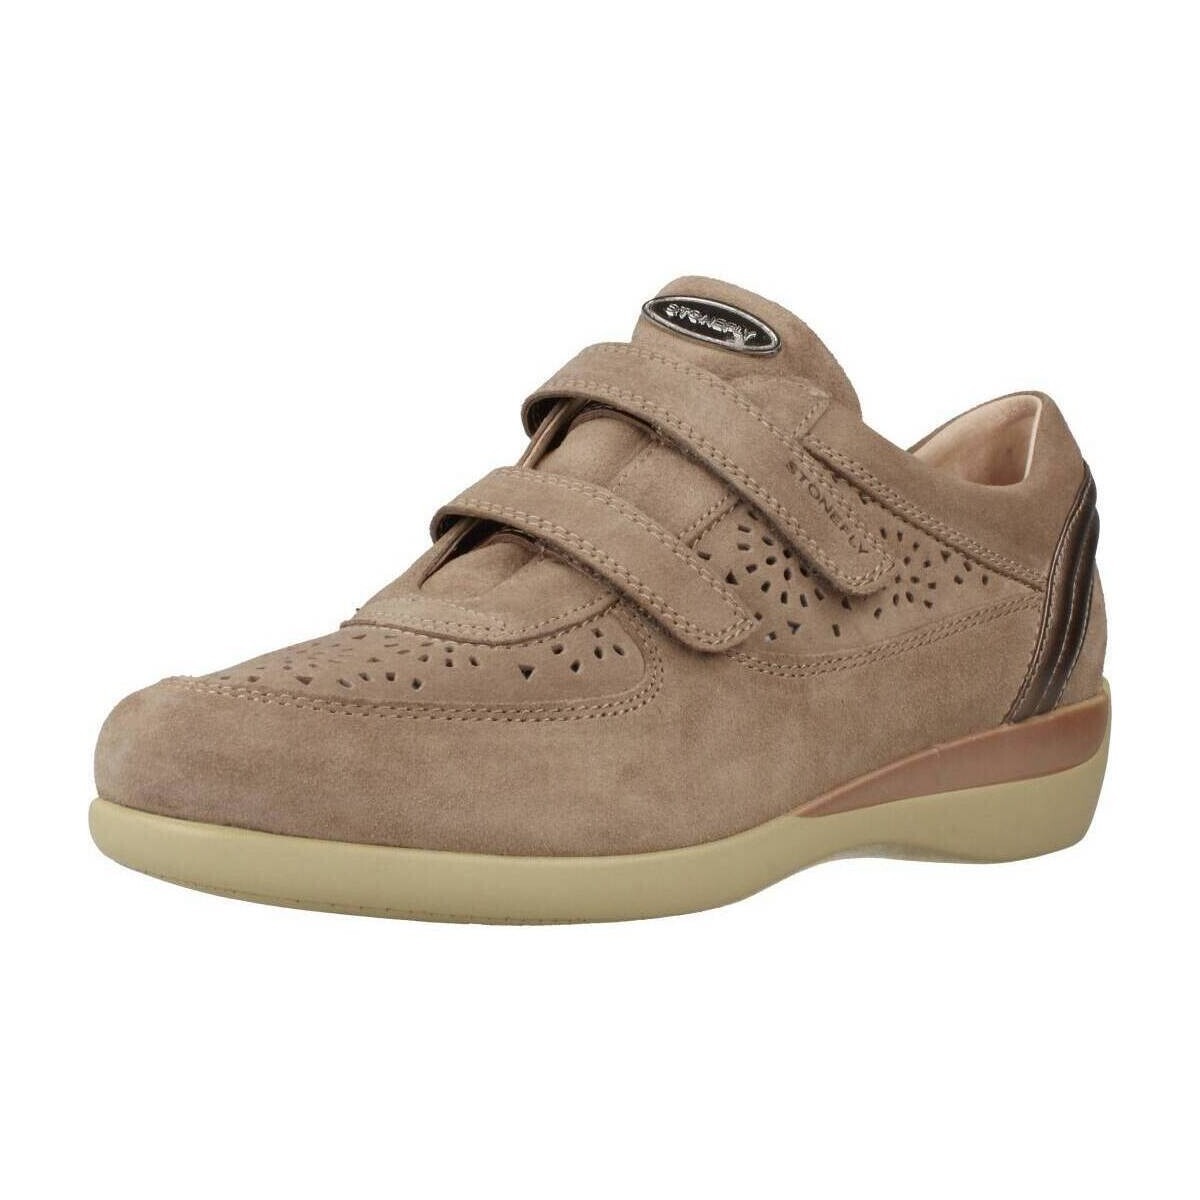 Stonefly - Womens Sneakers Brown at Spartoo GOOFASH